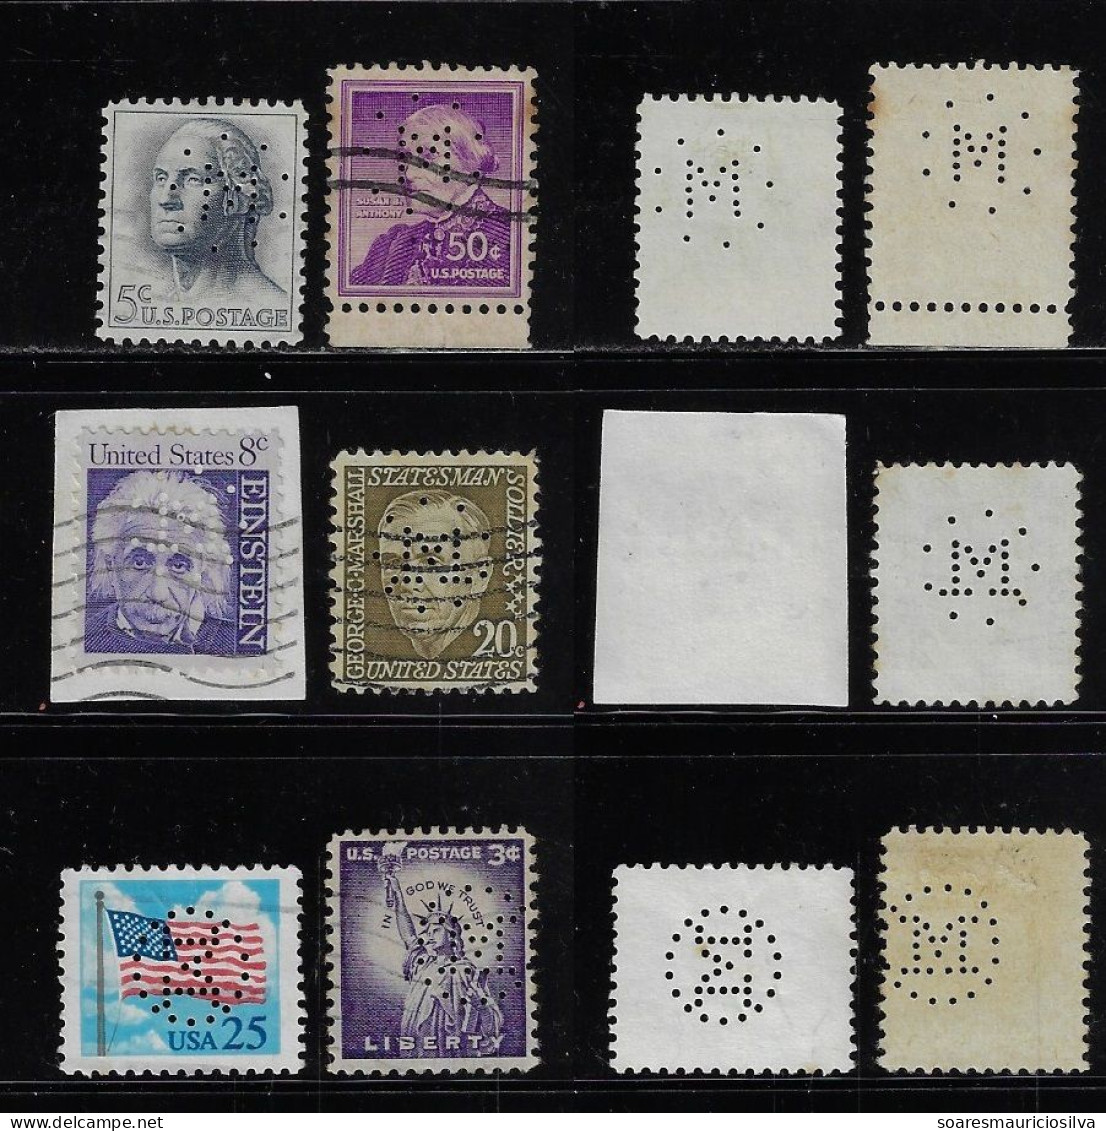 USA United States 6 Stamp With 3 Different Perfin M (circle) By State Of Michigan Lochung Perfore - Perforados